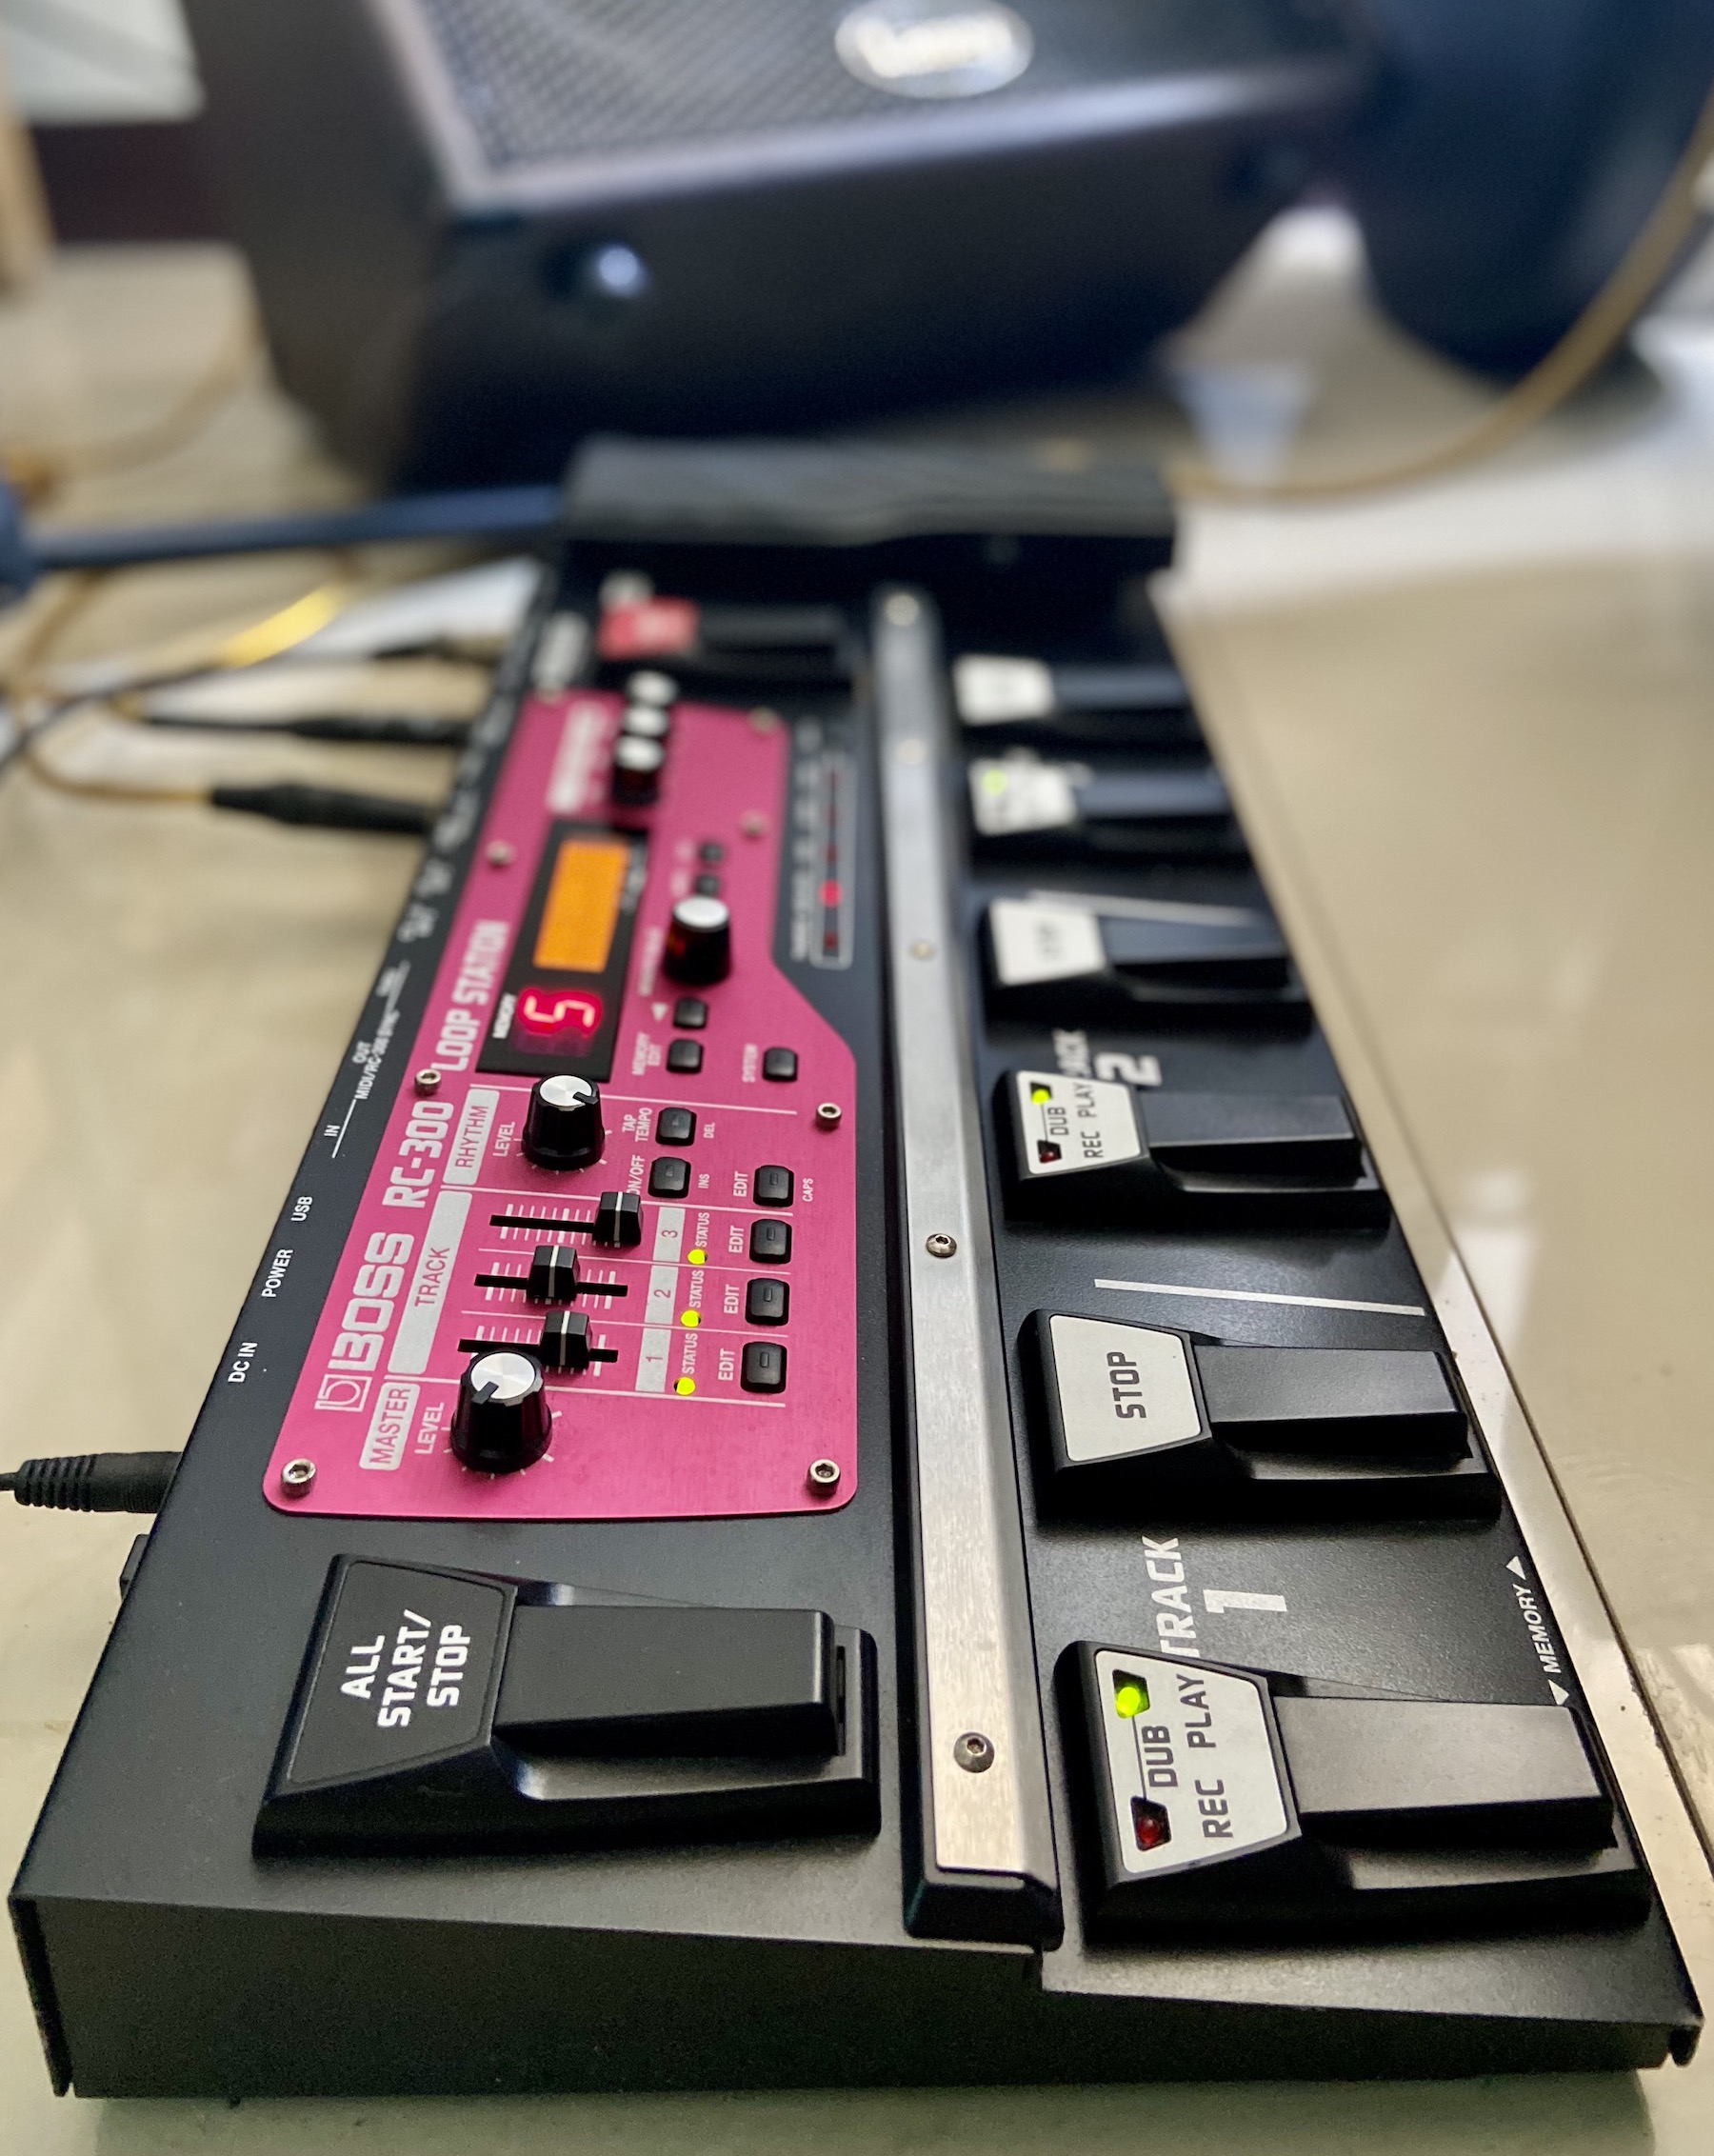 Boss RC-300 Looper Station Review